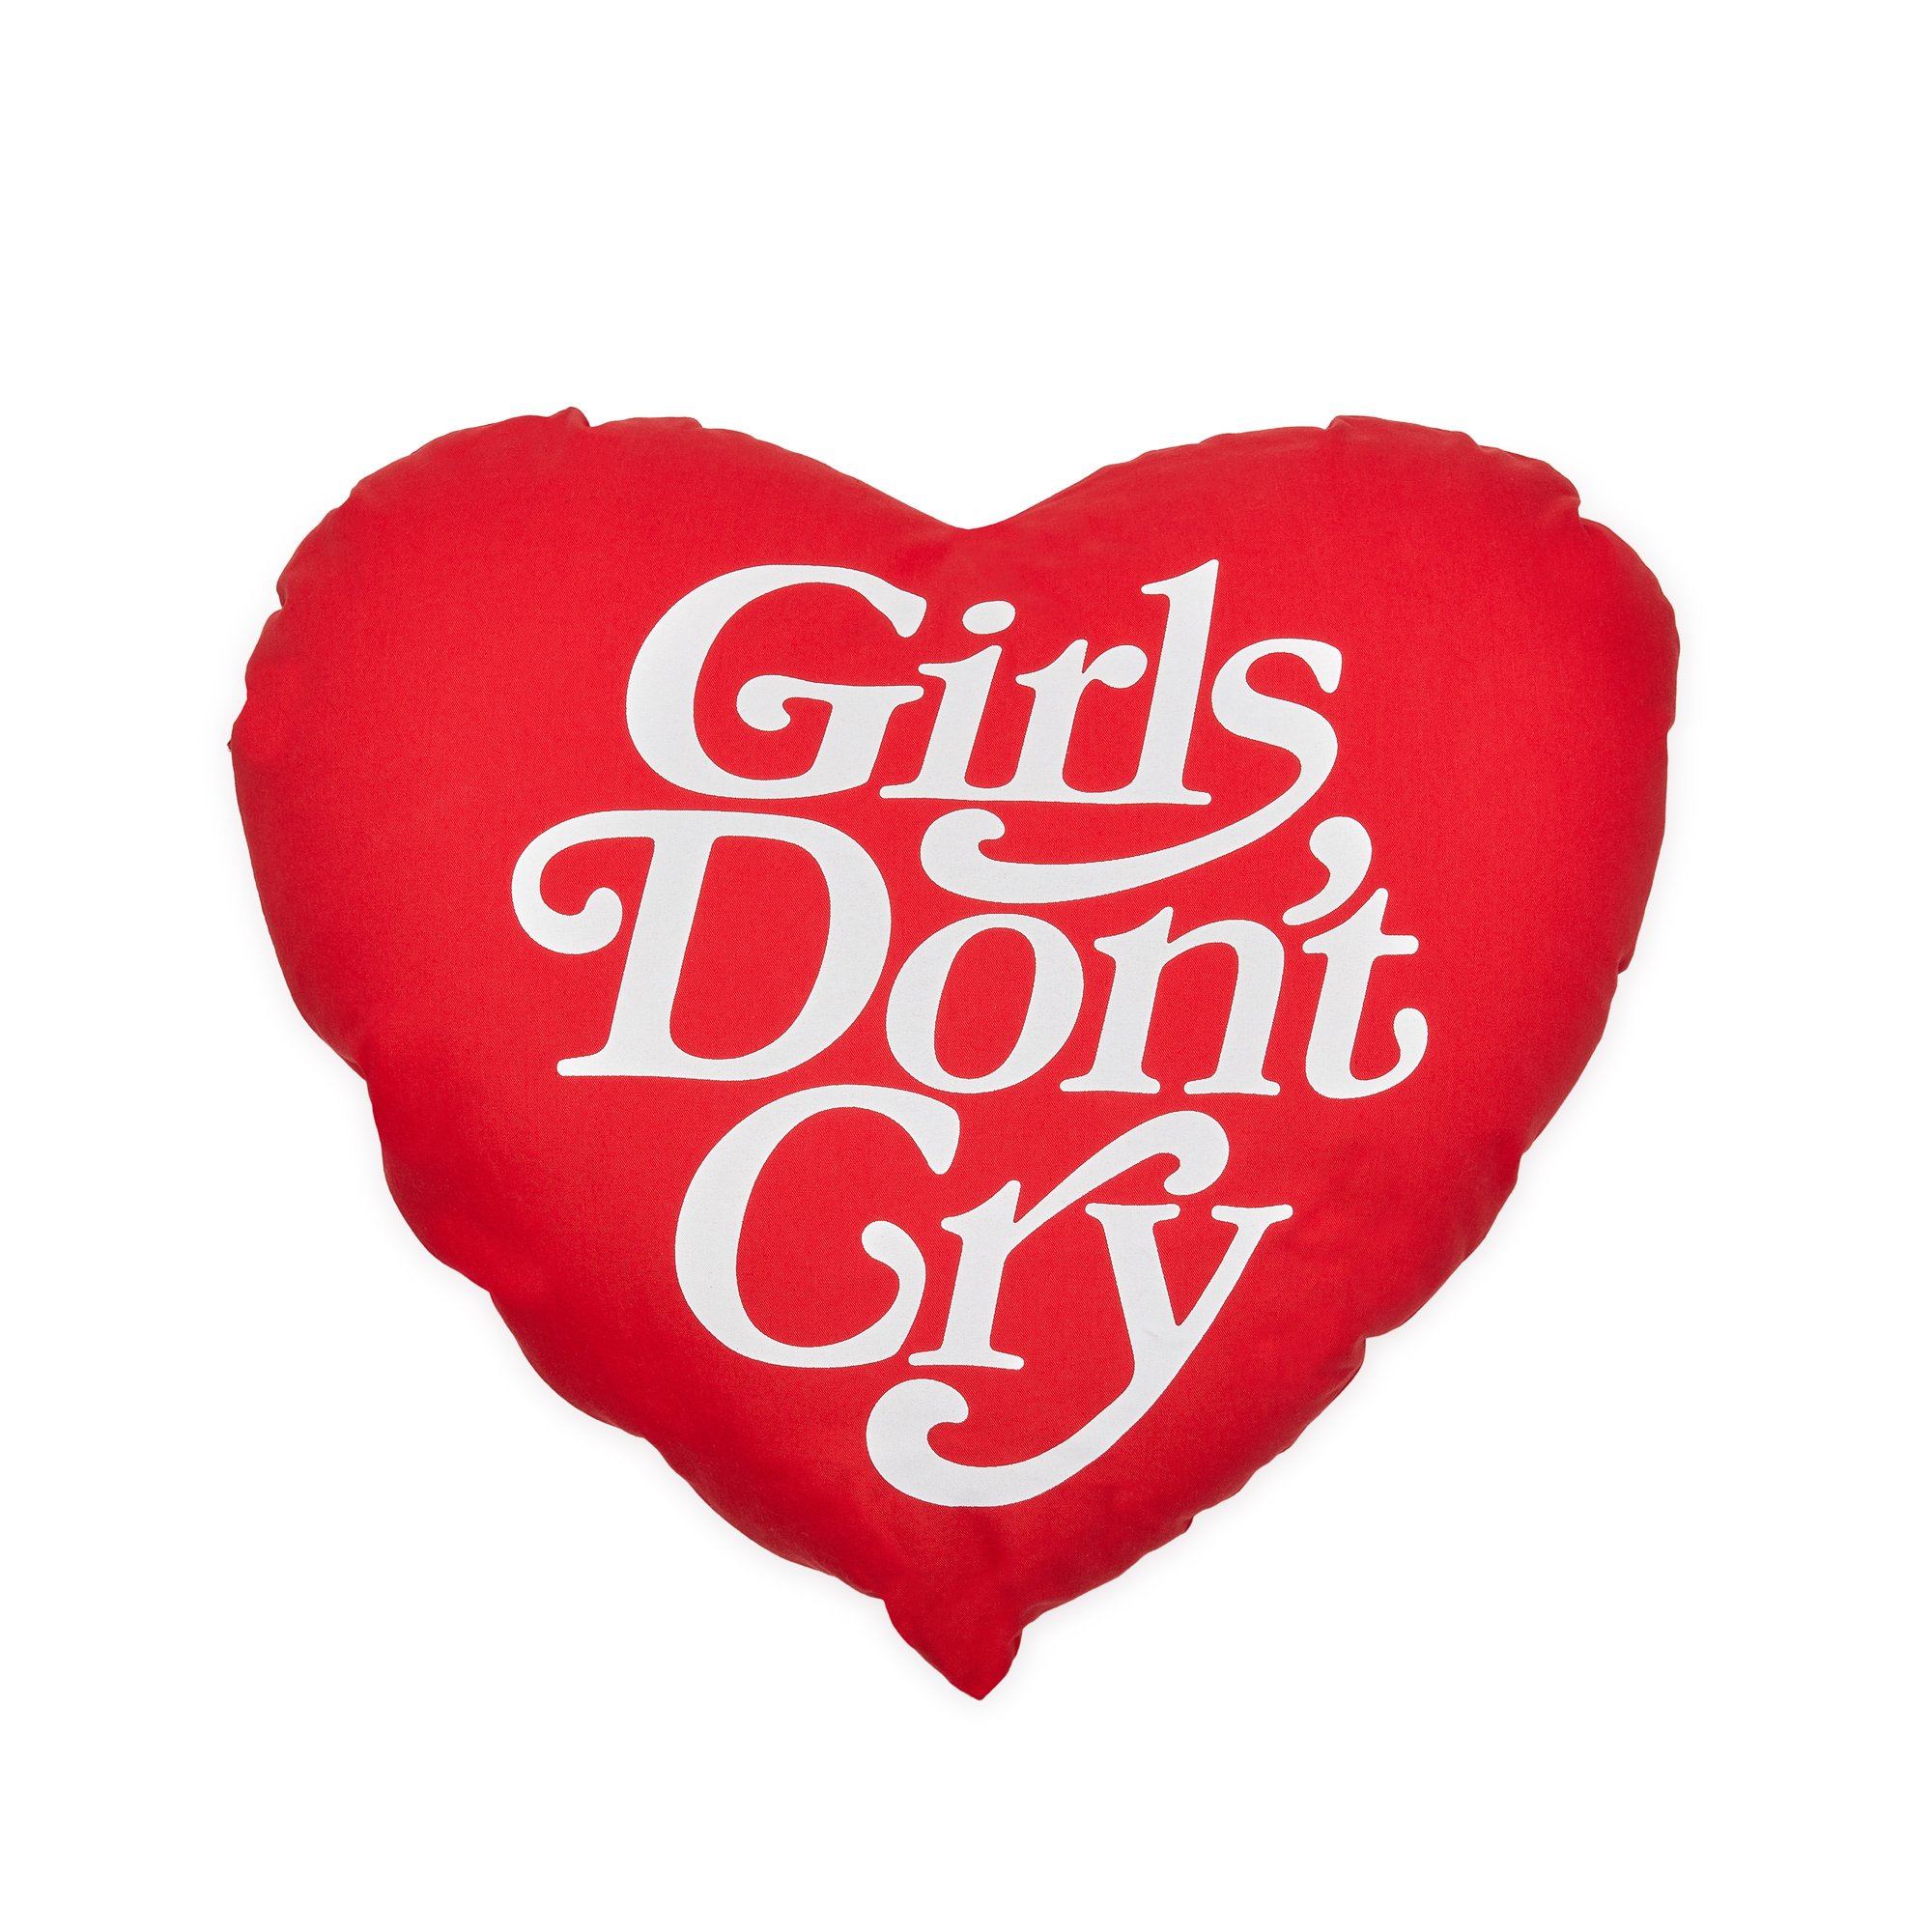 grls don't cry